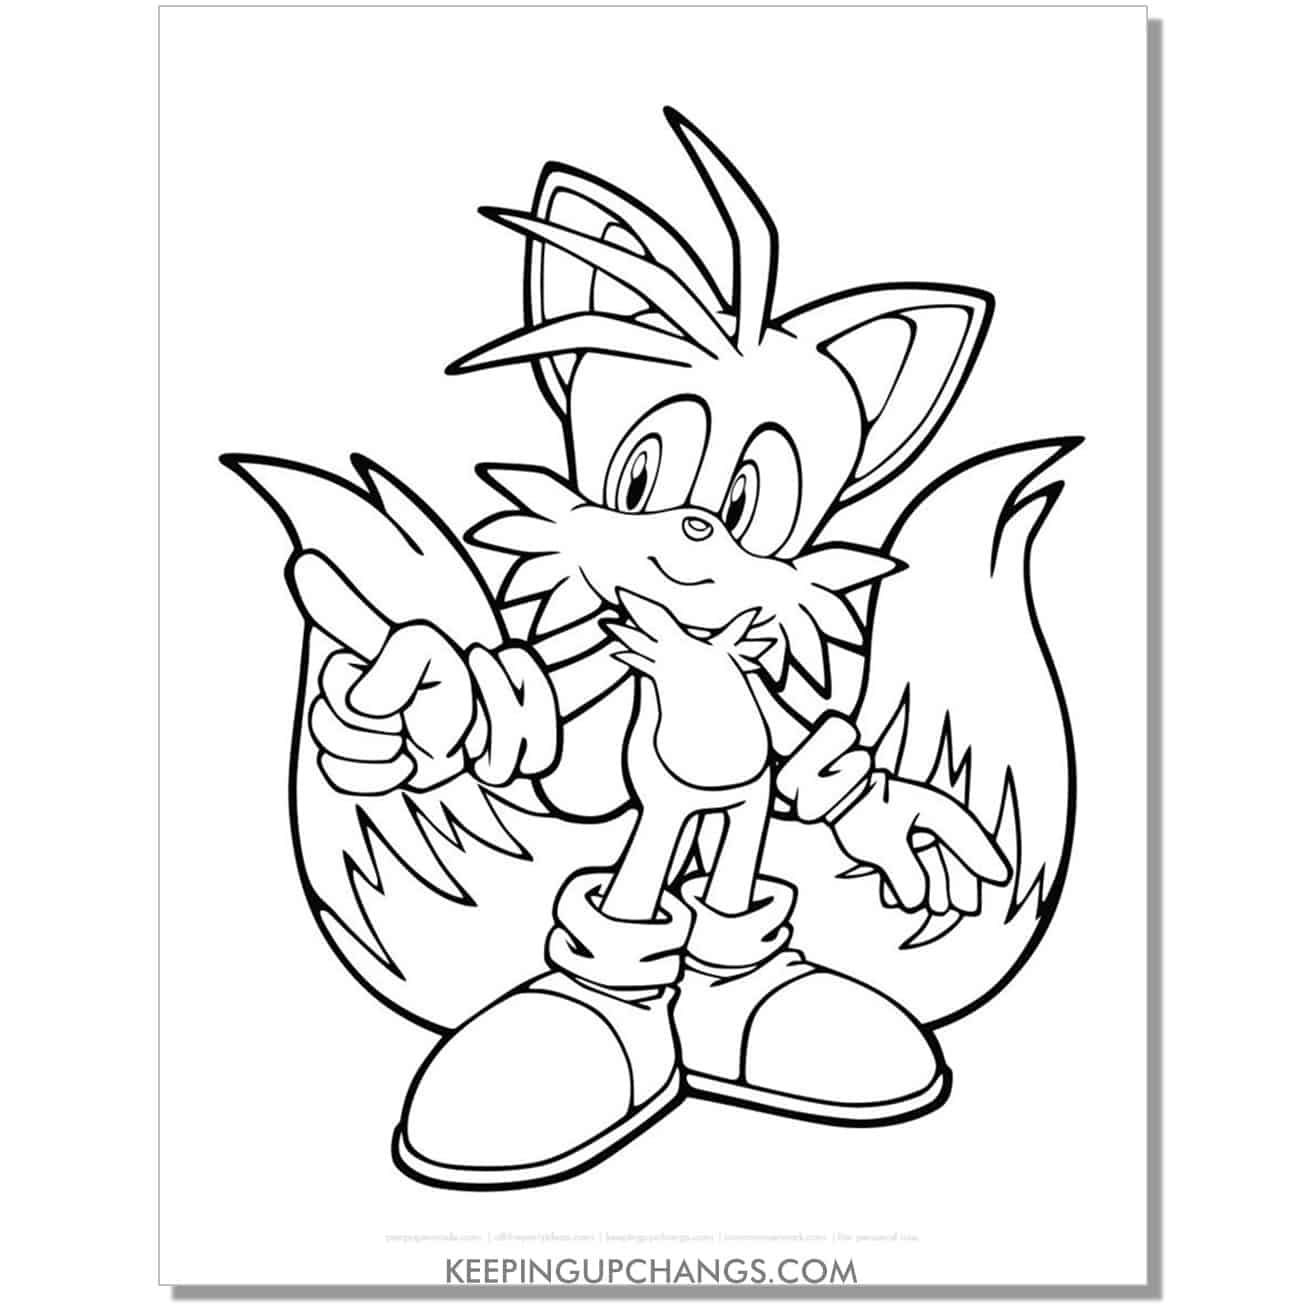 tails pointing index finger sonic coloring page.